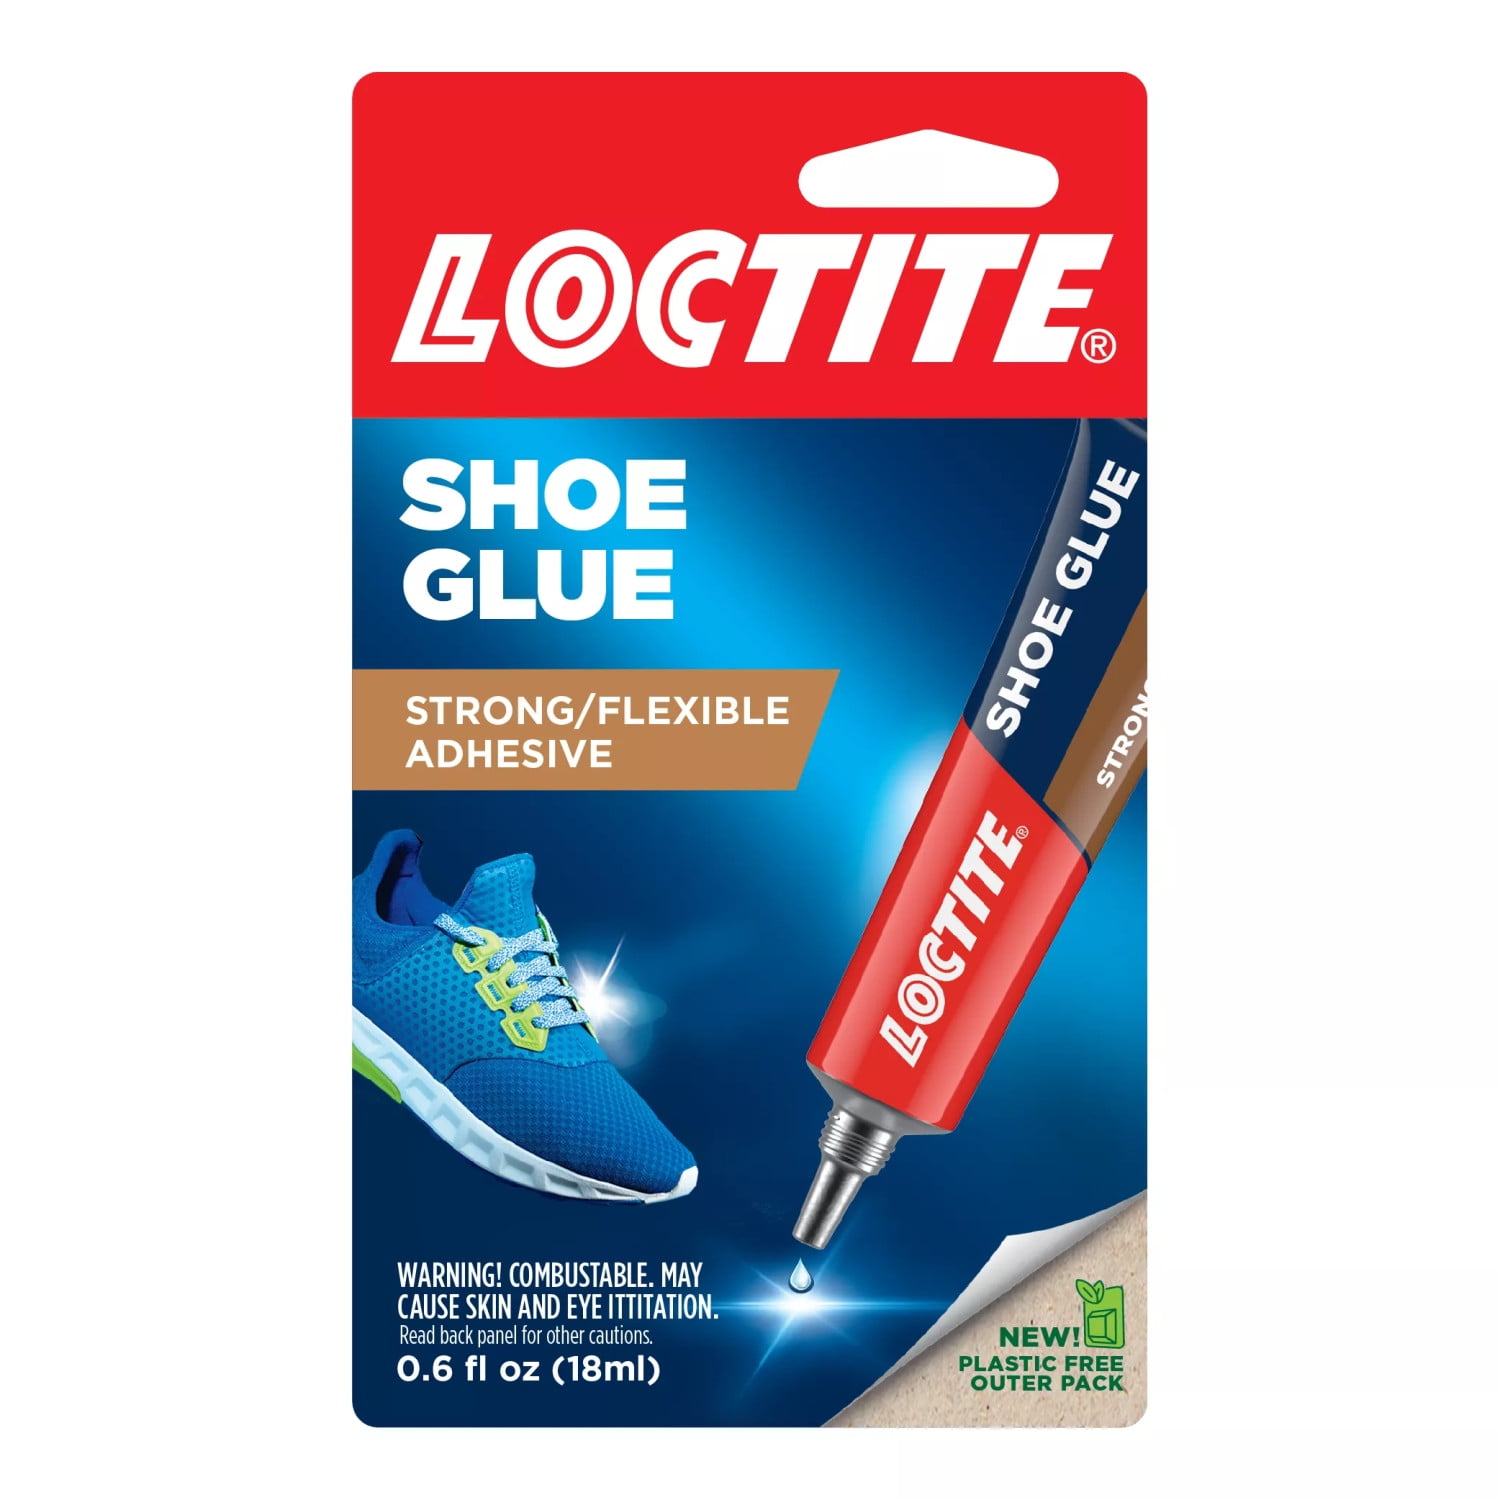 How To Choose Best Glue For Shoes